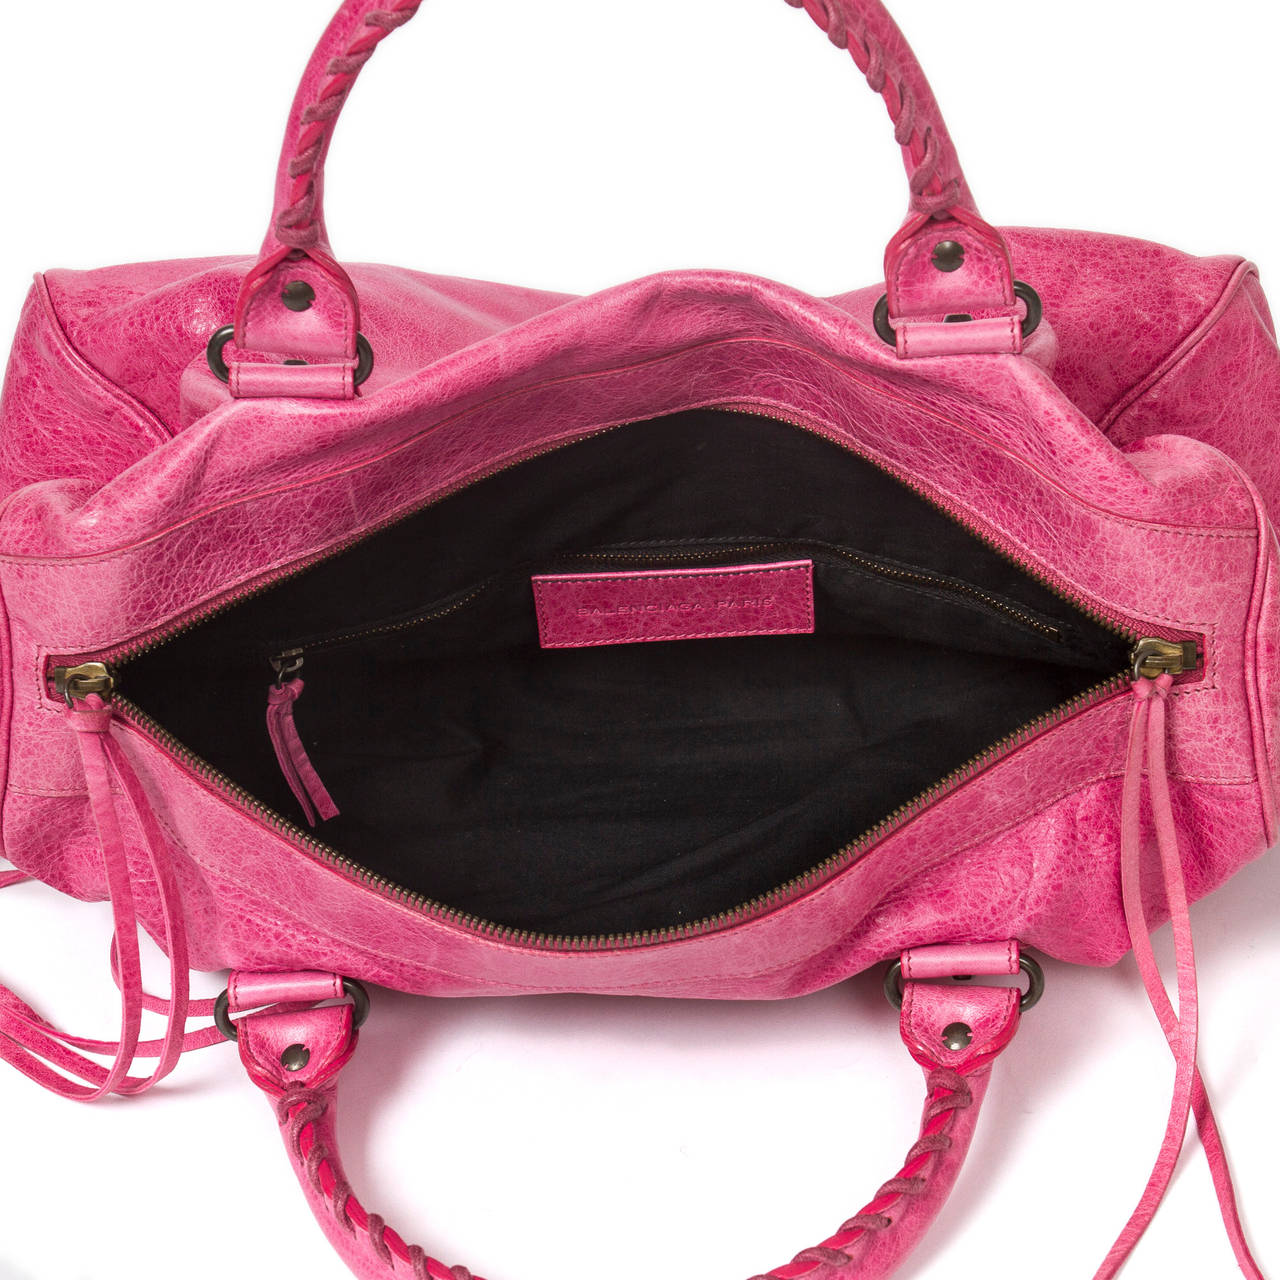 Balenciaga City Bag Pink Distressed Leather For Sale 2